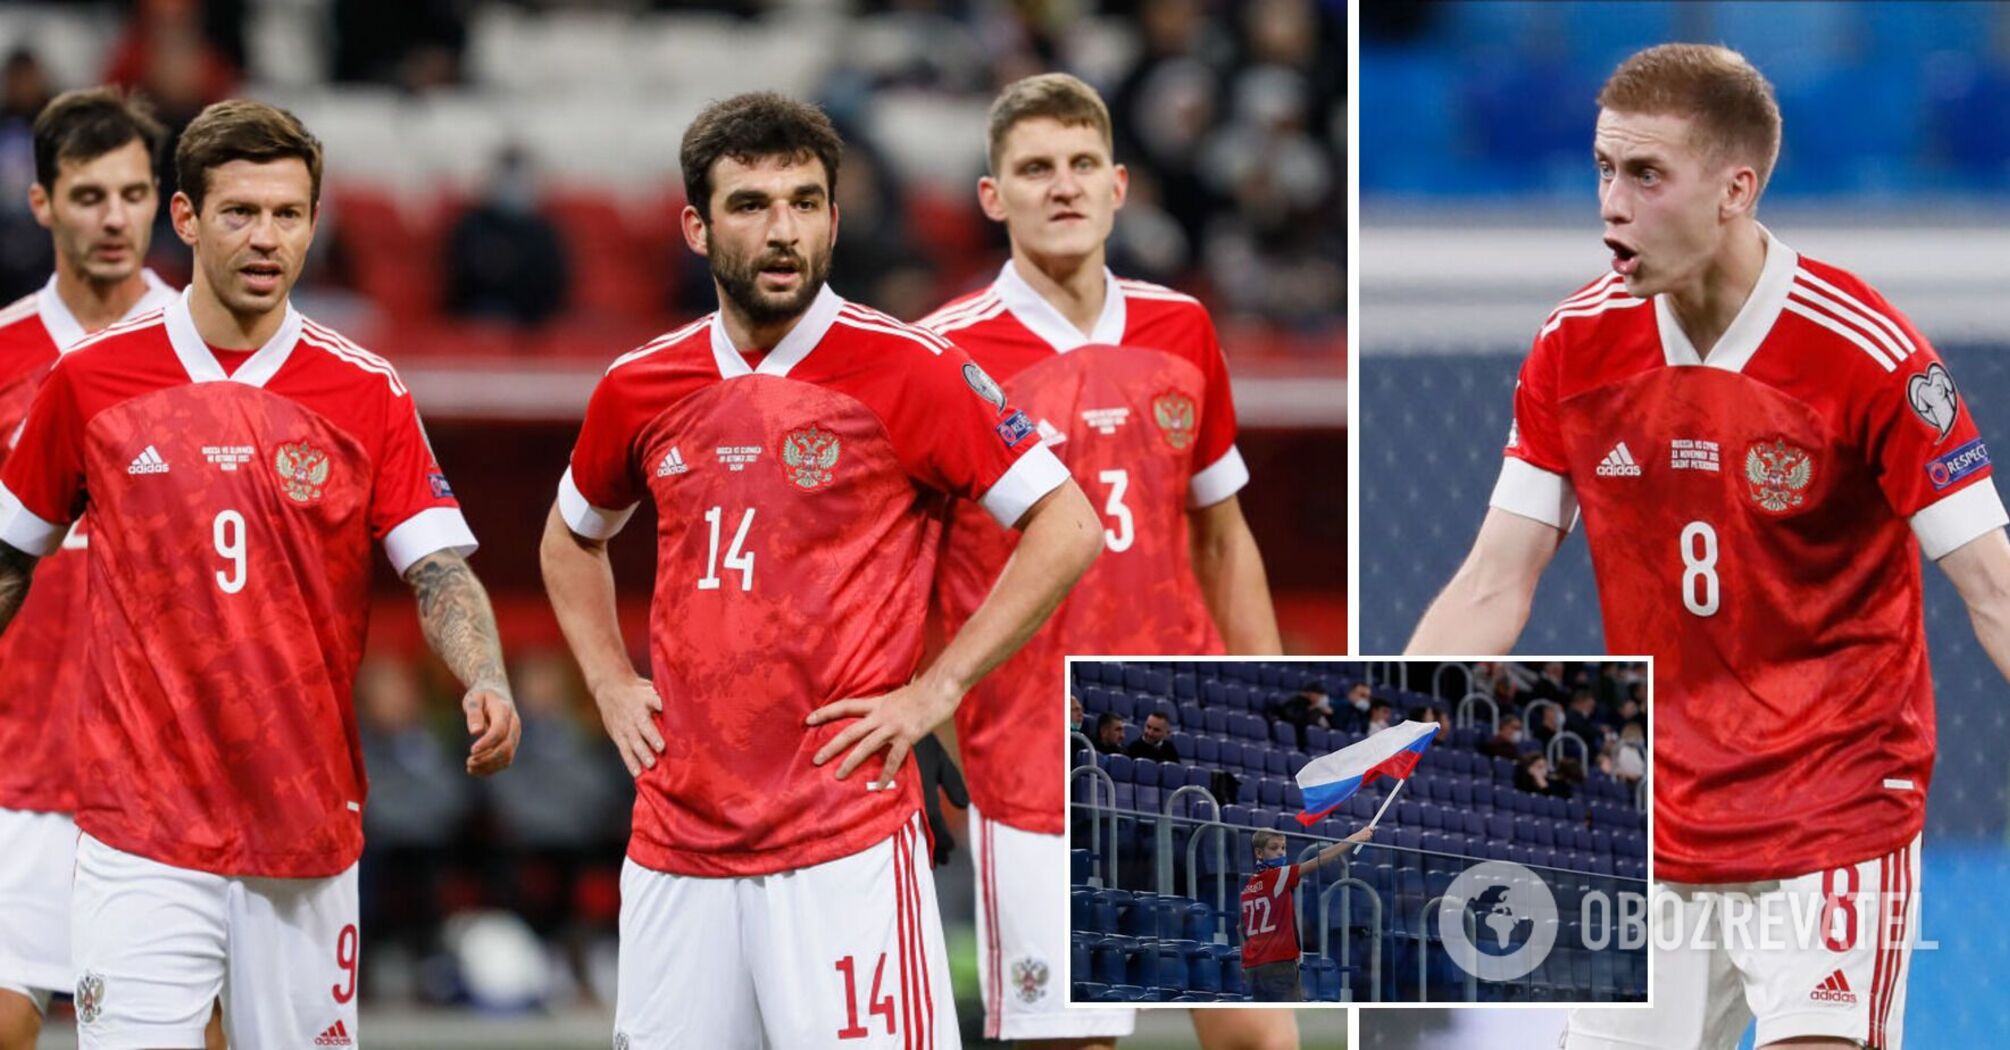 Russian national team will not play at the 2022 World Cup